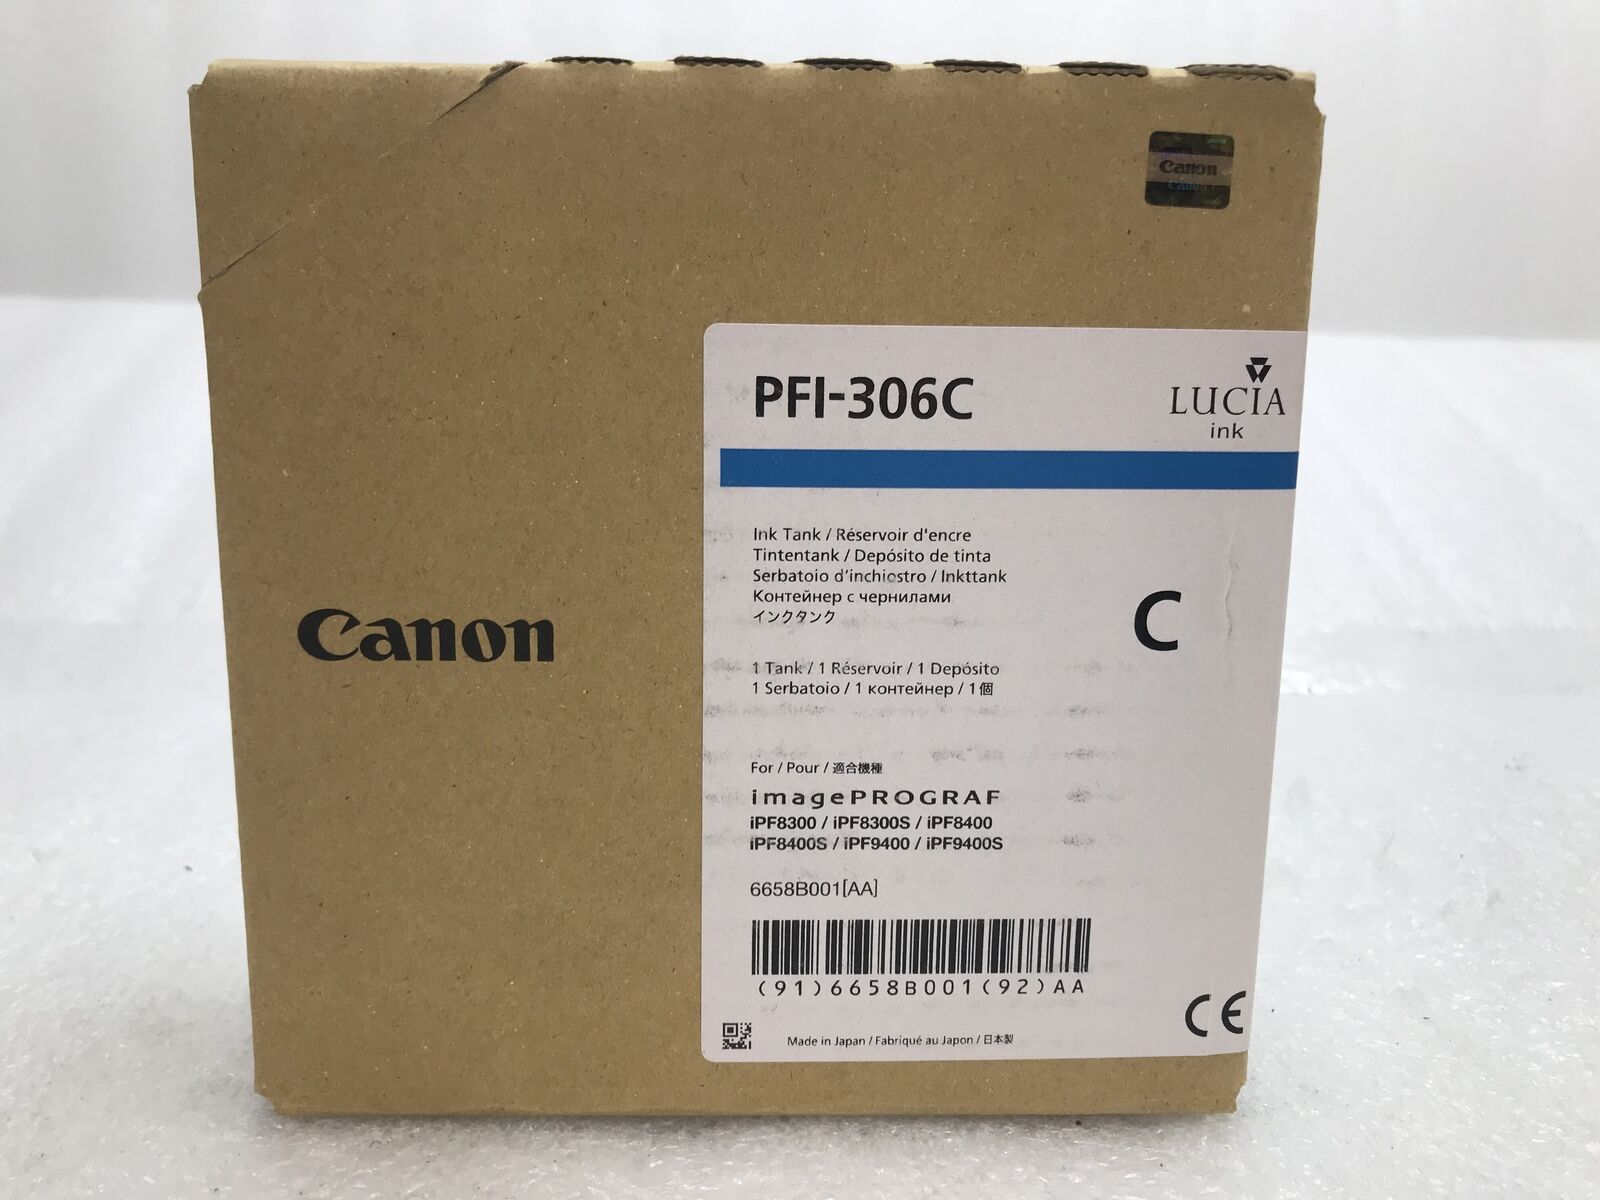 New Genuine OEM Canon PFI-306C Cyan Ink 6658B001 For iPF8300 8400 9400 EXP: 2016